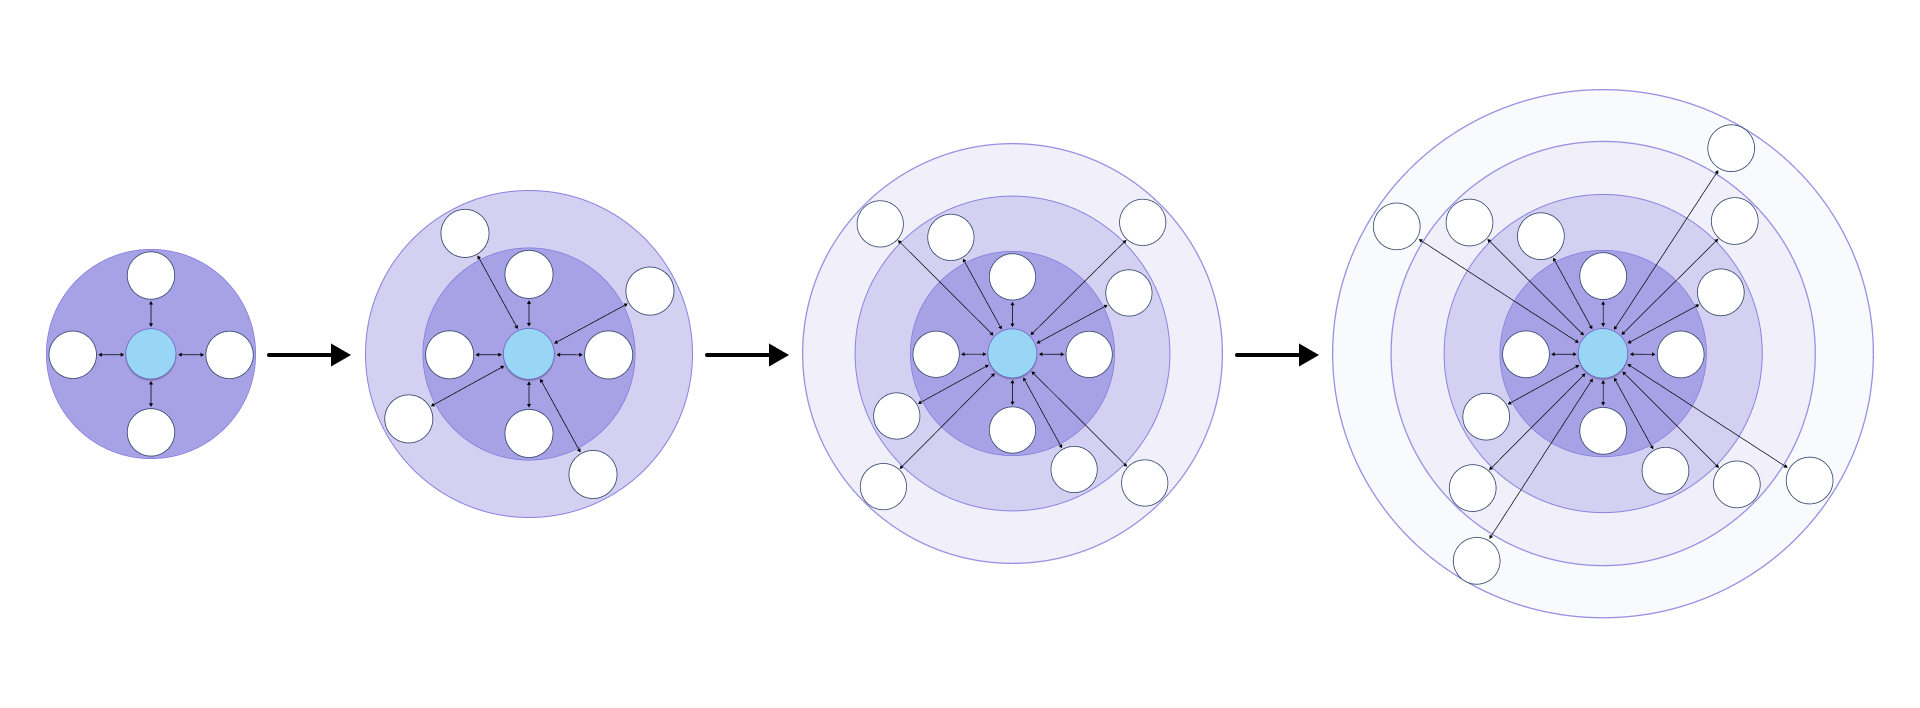 A landscape oriented diagram colored with shades of purple and blue; from left to right, an expanding set of hubs (represented by circles) and their spokes (represented by straight lines) extending to new hubs; each new set of hubs lives in a larger set of gradually expanding concentric circles